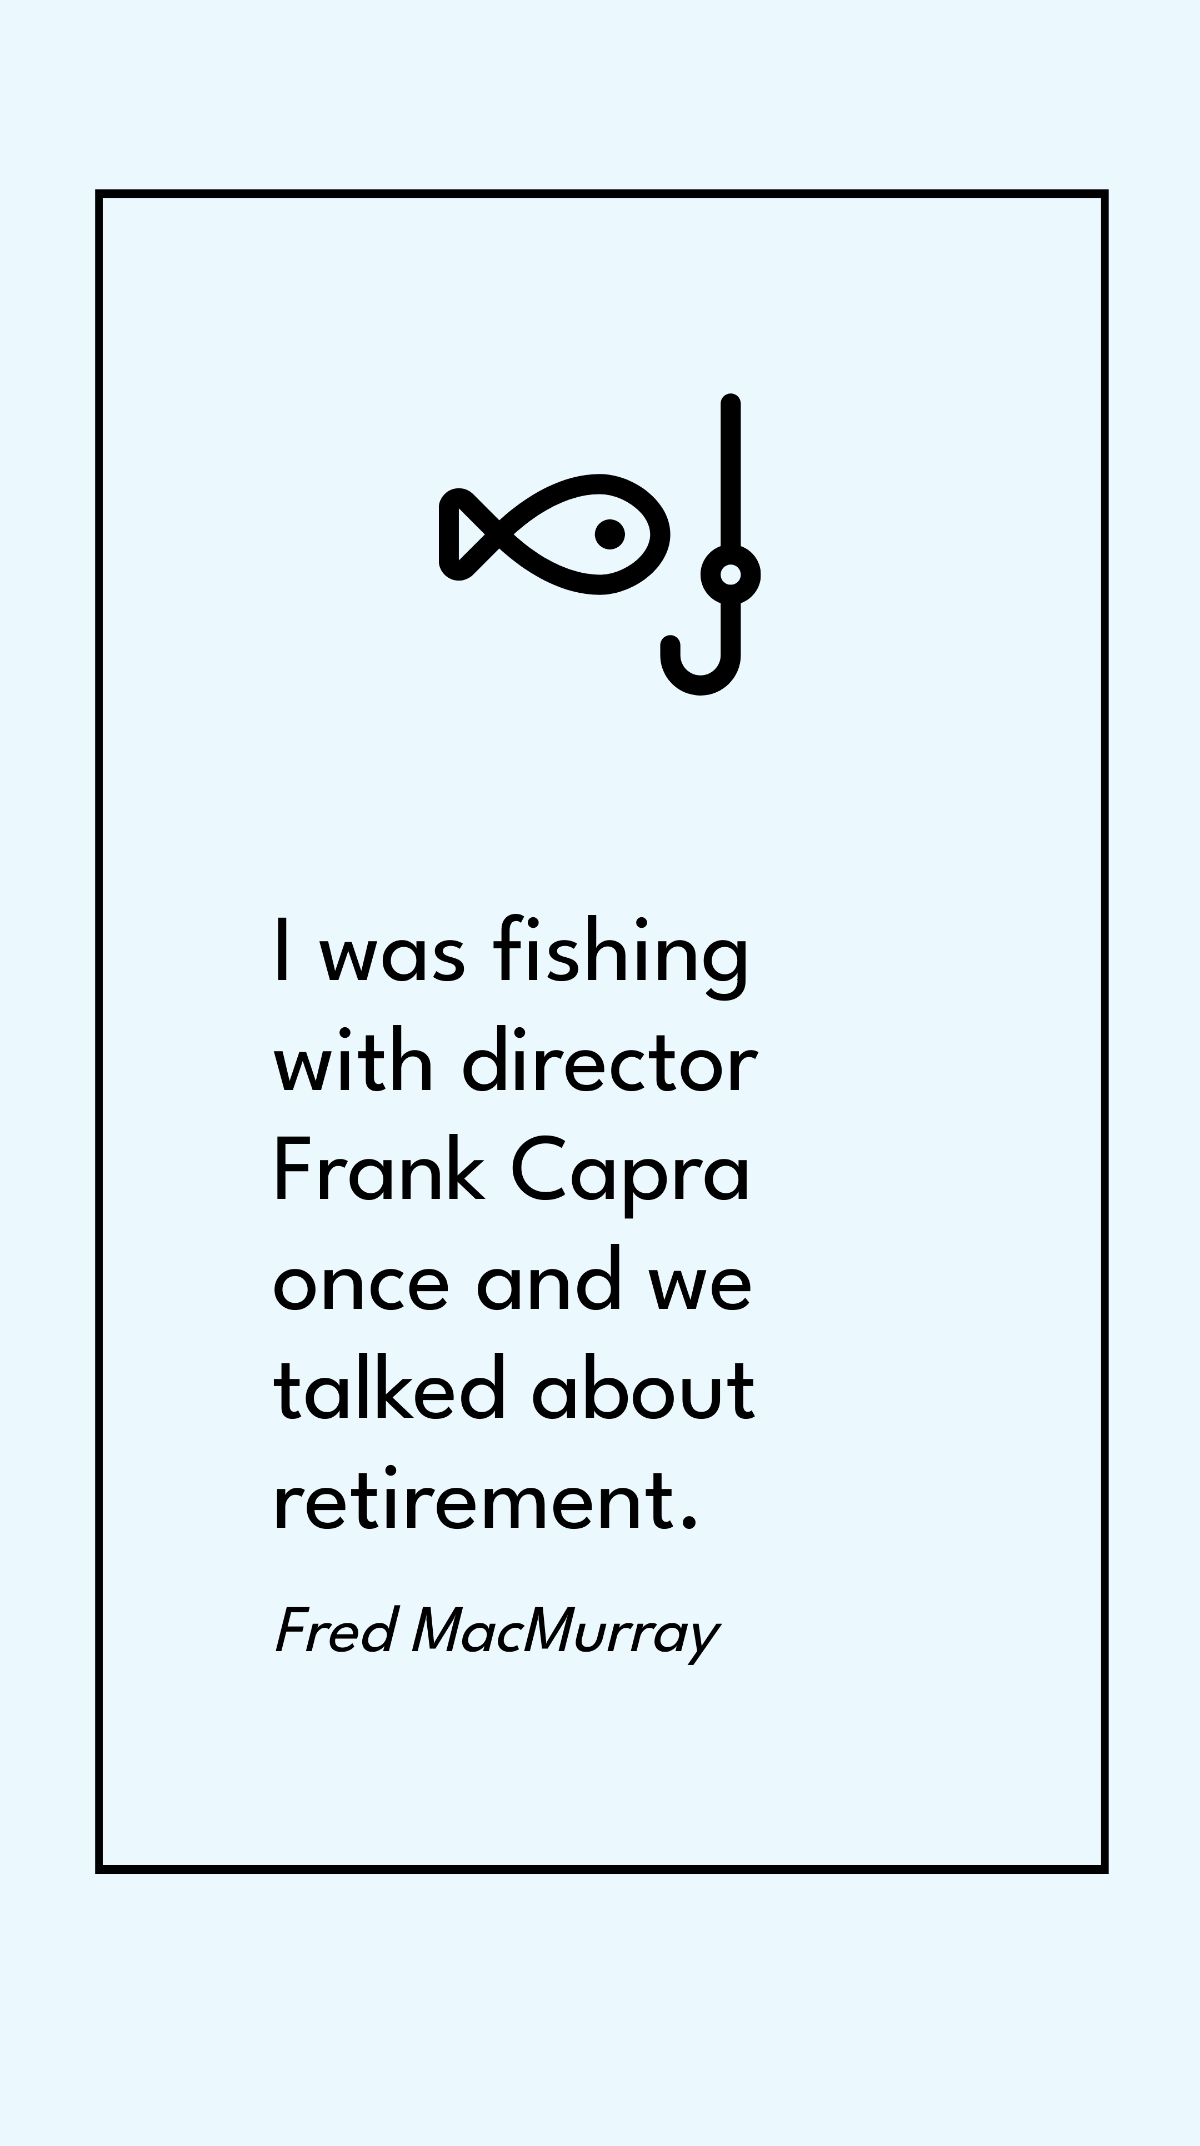 Free Fred MacMurray - I was fishing with director Frank Capra once and we talked about retirement. Template